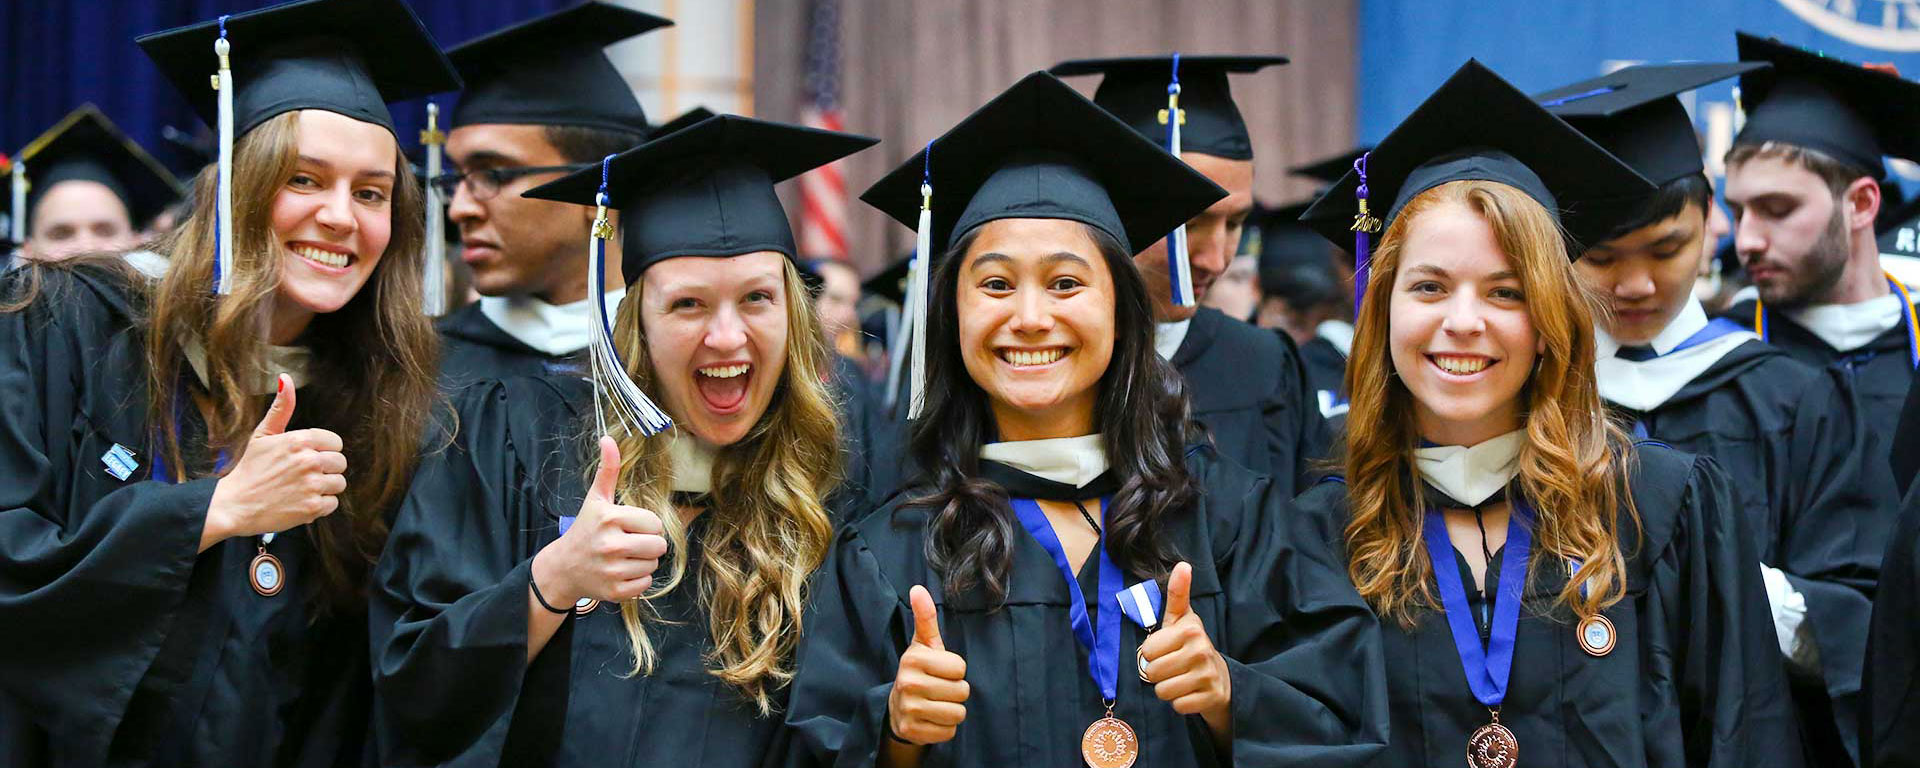 2019 Graduates in caps and gowns smile and give a thumbs up